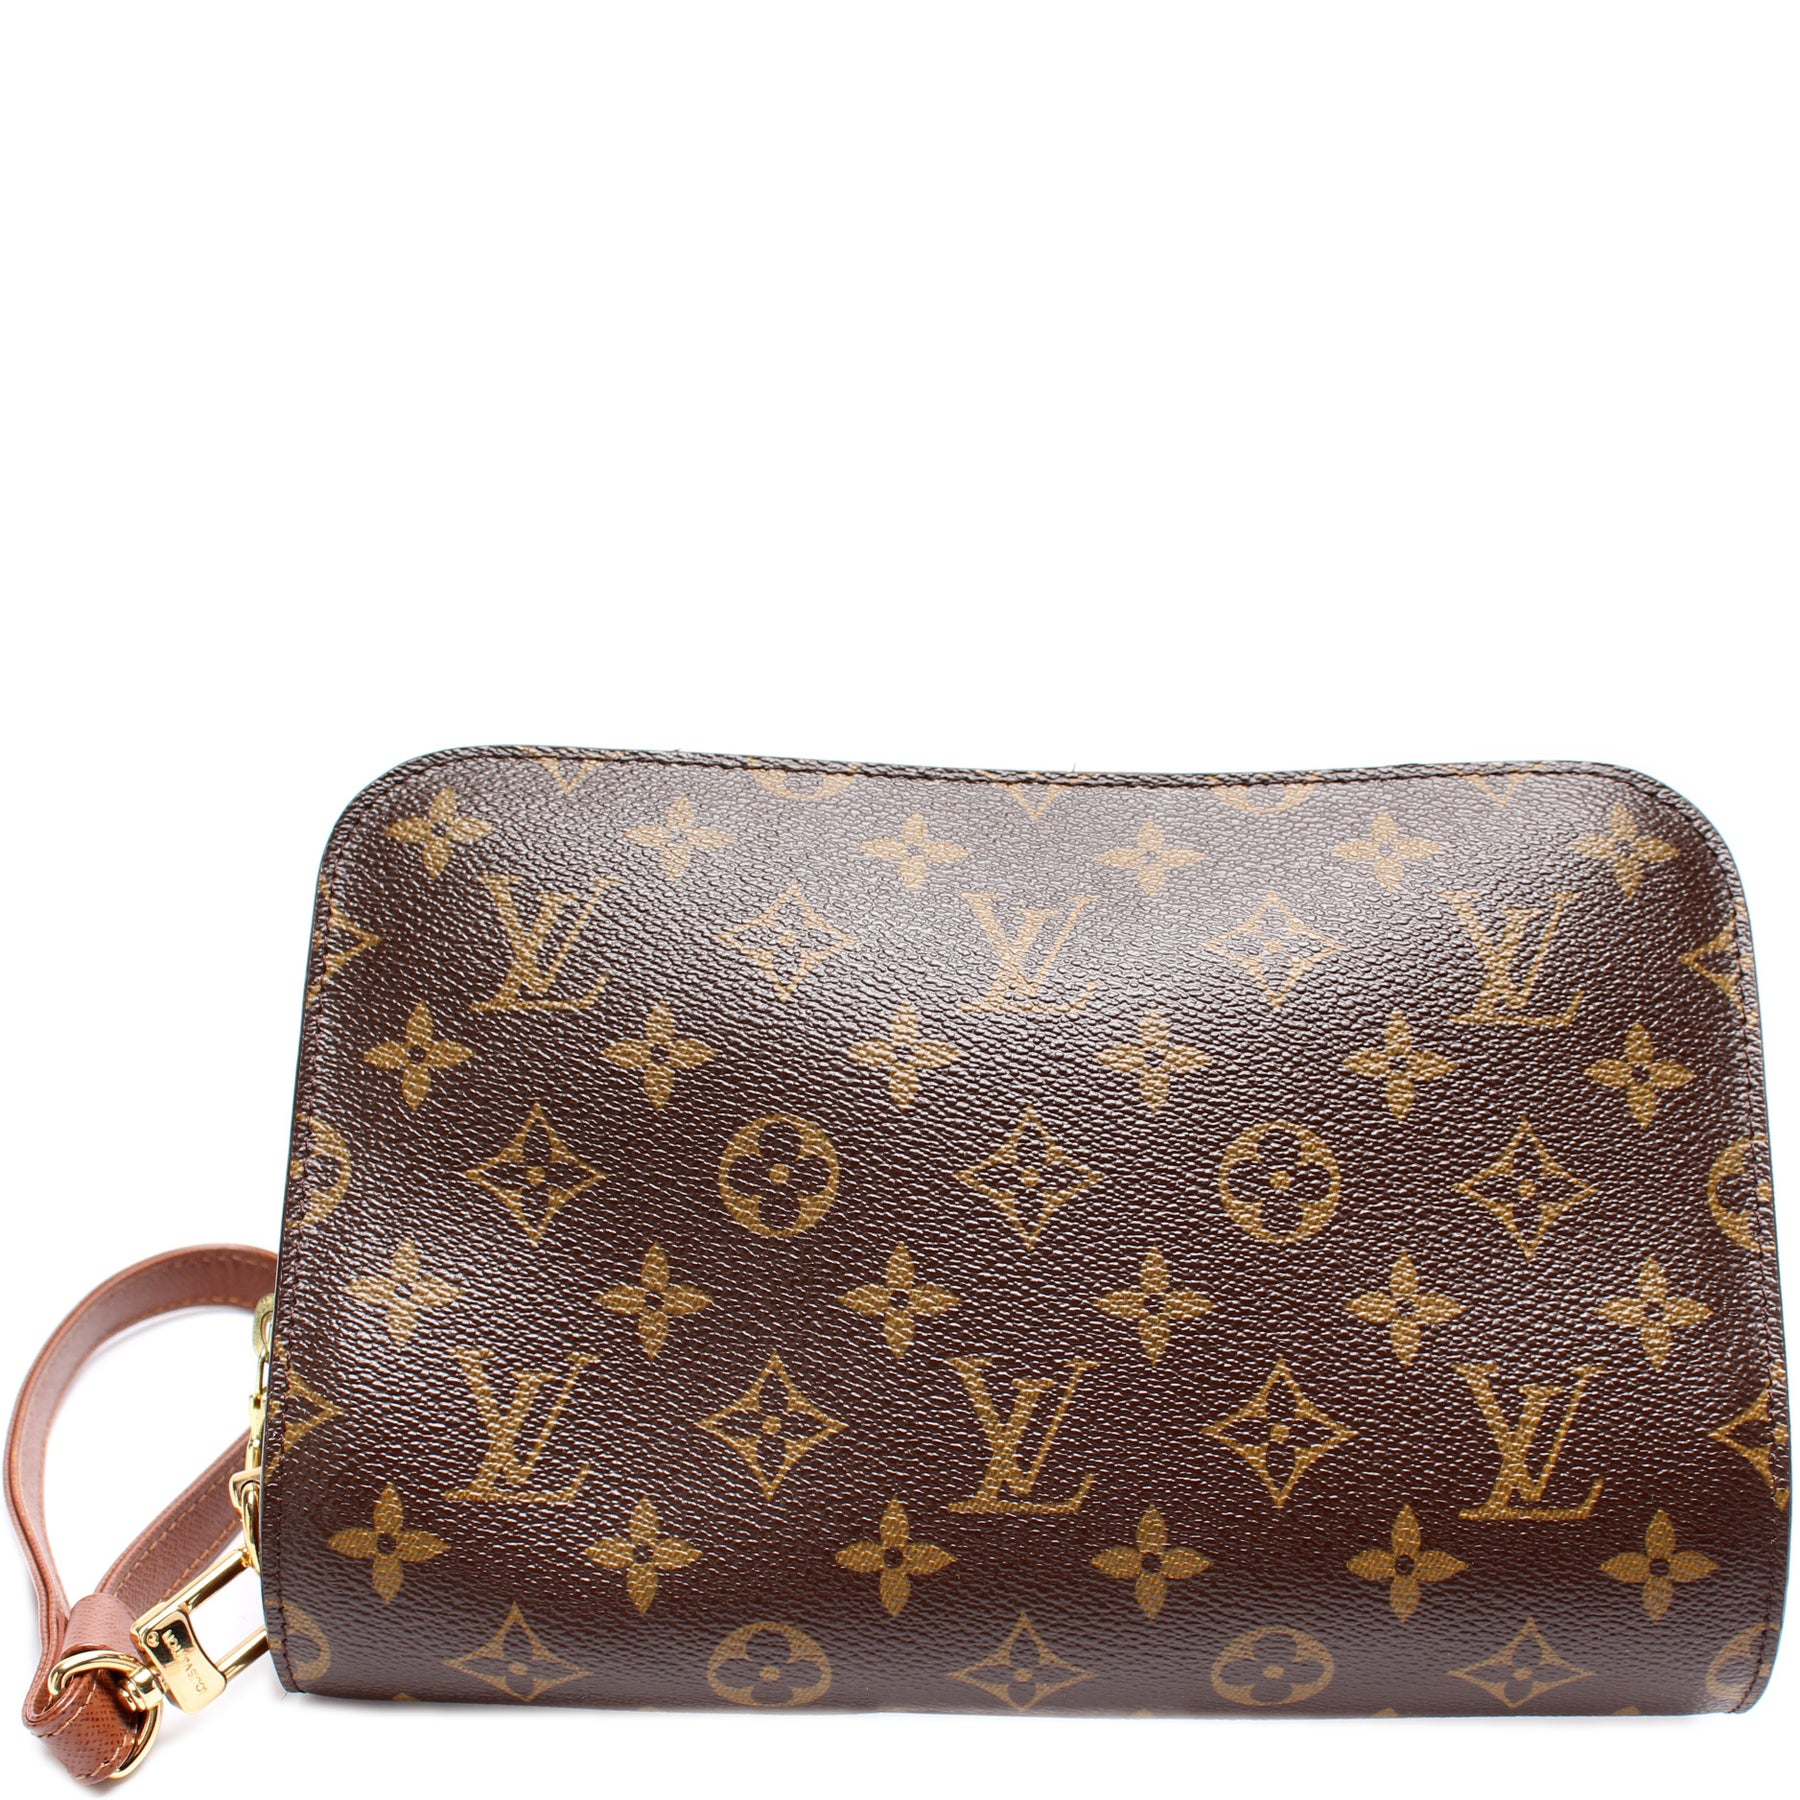 Louis Vuitton - Authenticated Orsay Clutch Bag - Cloth Brown for Women, Very Good Condition